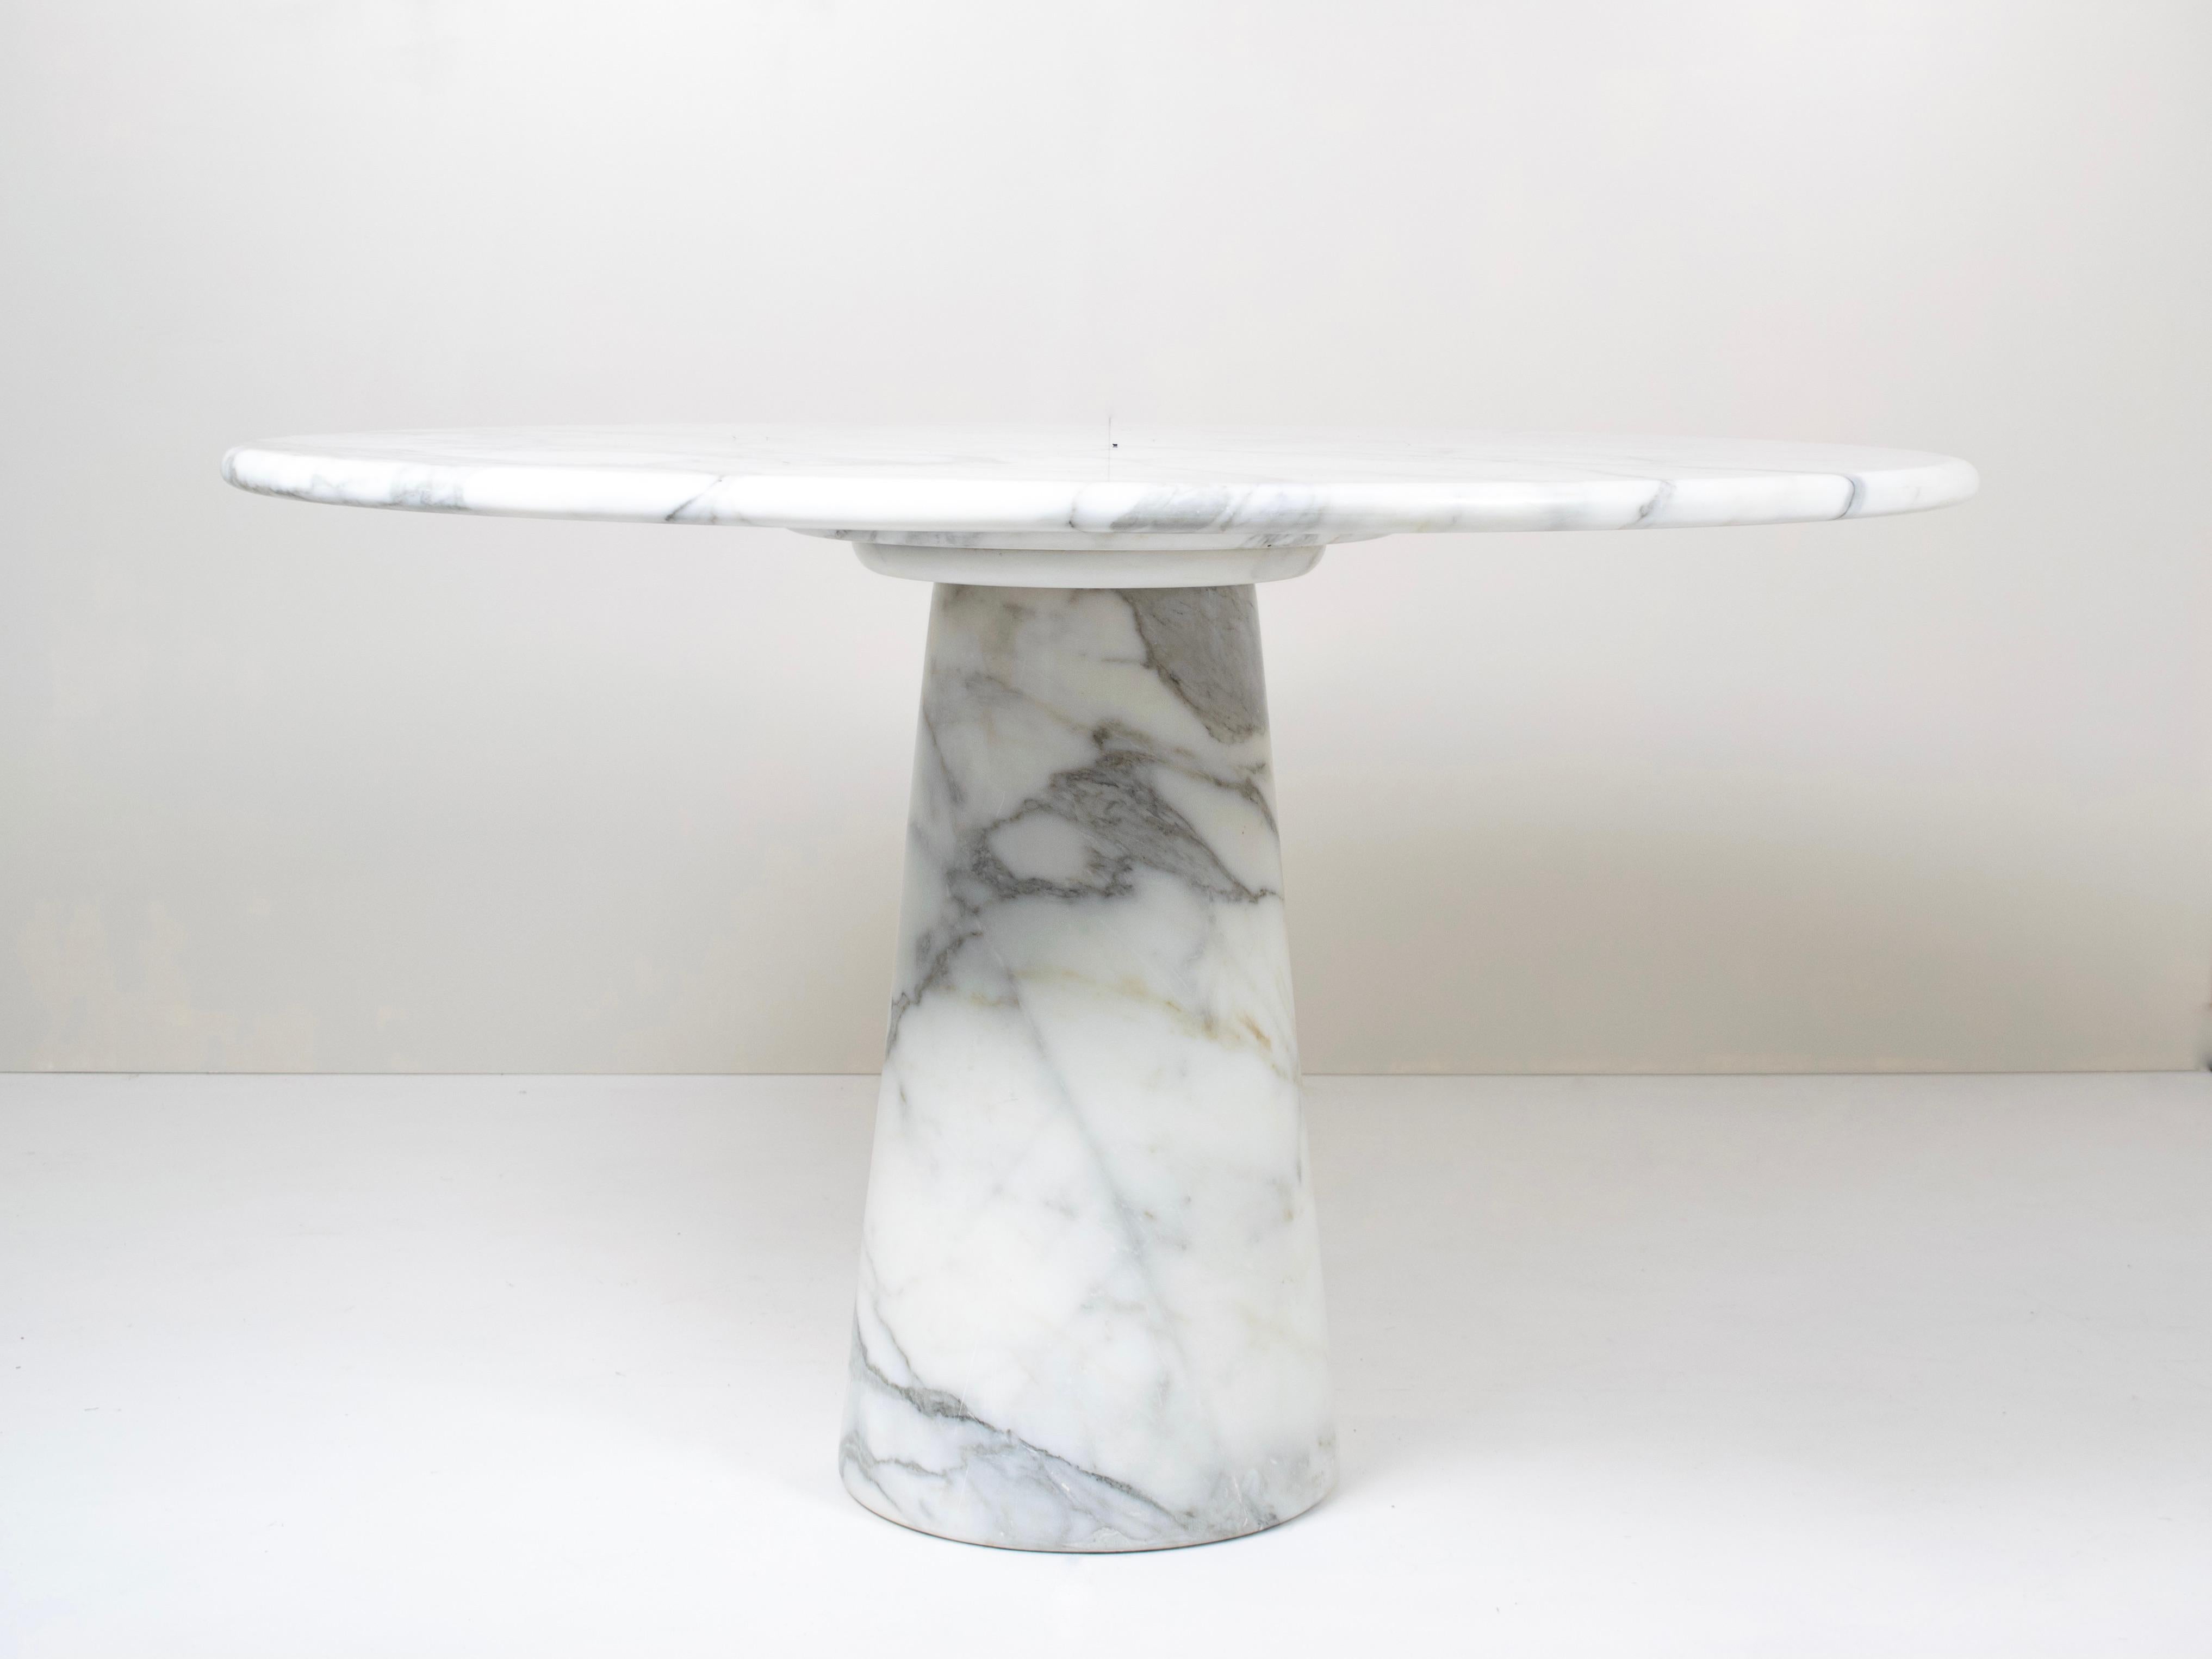 Solid marble dining table made in Italy in the 1970s. We recently found it in Sicily. It has a sleek design and breaths a chique and modern atmosphere. The table resembles the design of Angelo Mangiarotti.
It consists of three pieces; the leg in